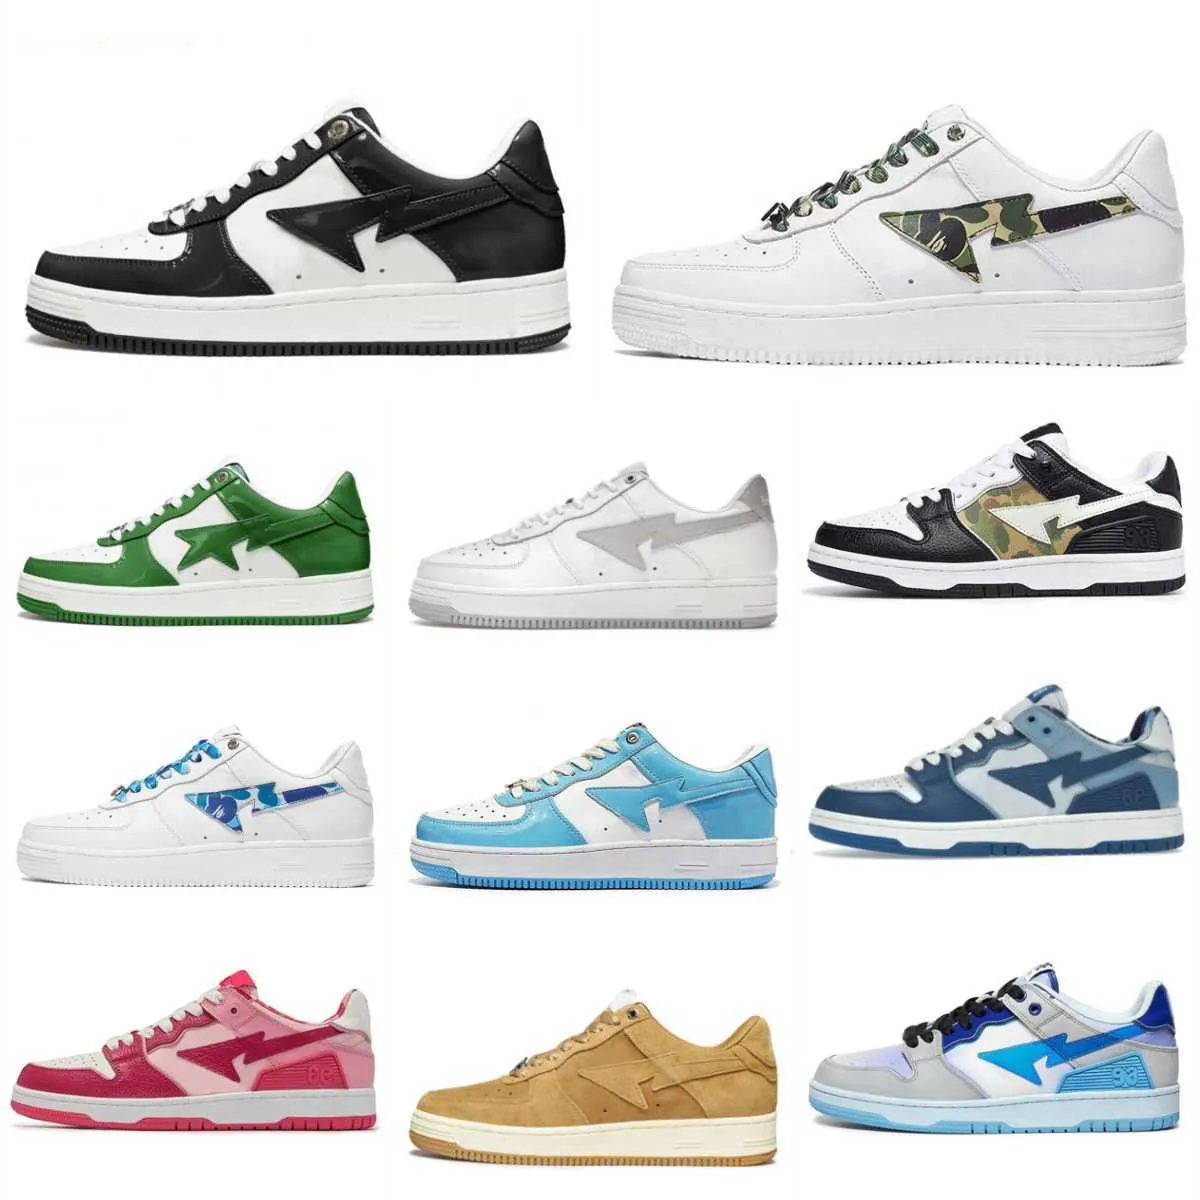 Trainers JJJJound SK8 Low Casual Shoes Men Women Stas Color Camo APES Green Black White BapeStaesi Tennis Combo Bathing Pink Patent Leather Sports Designer Sneakers